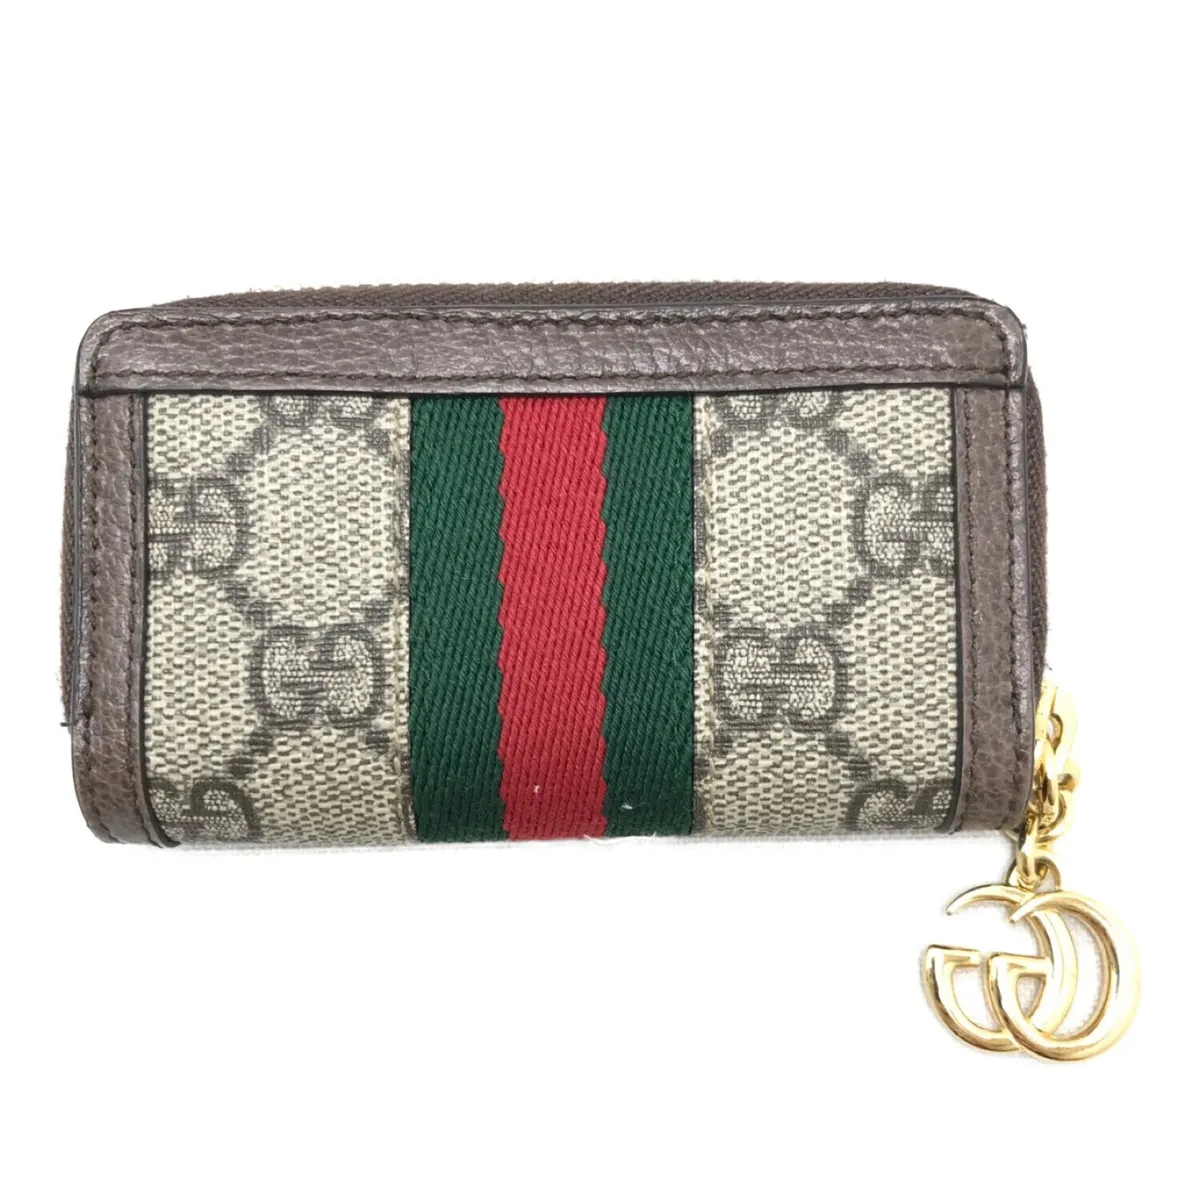 671722 OPHIDIA KEY CASE Holder Pouch Chain Wallet Coin Purse Designer Bag  Handbags Totes Wallets Purses // With Box & Dust Bag // From Join2, $30.97